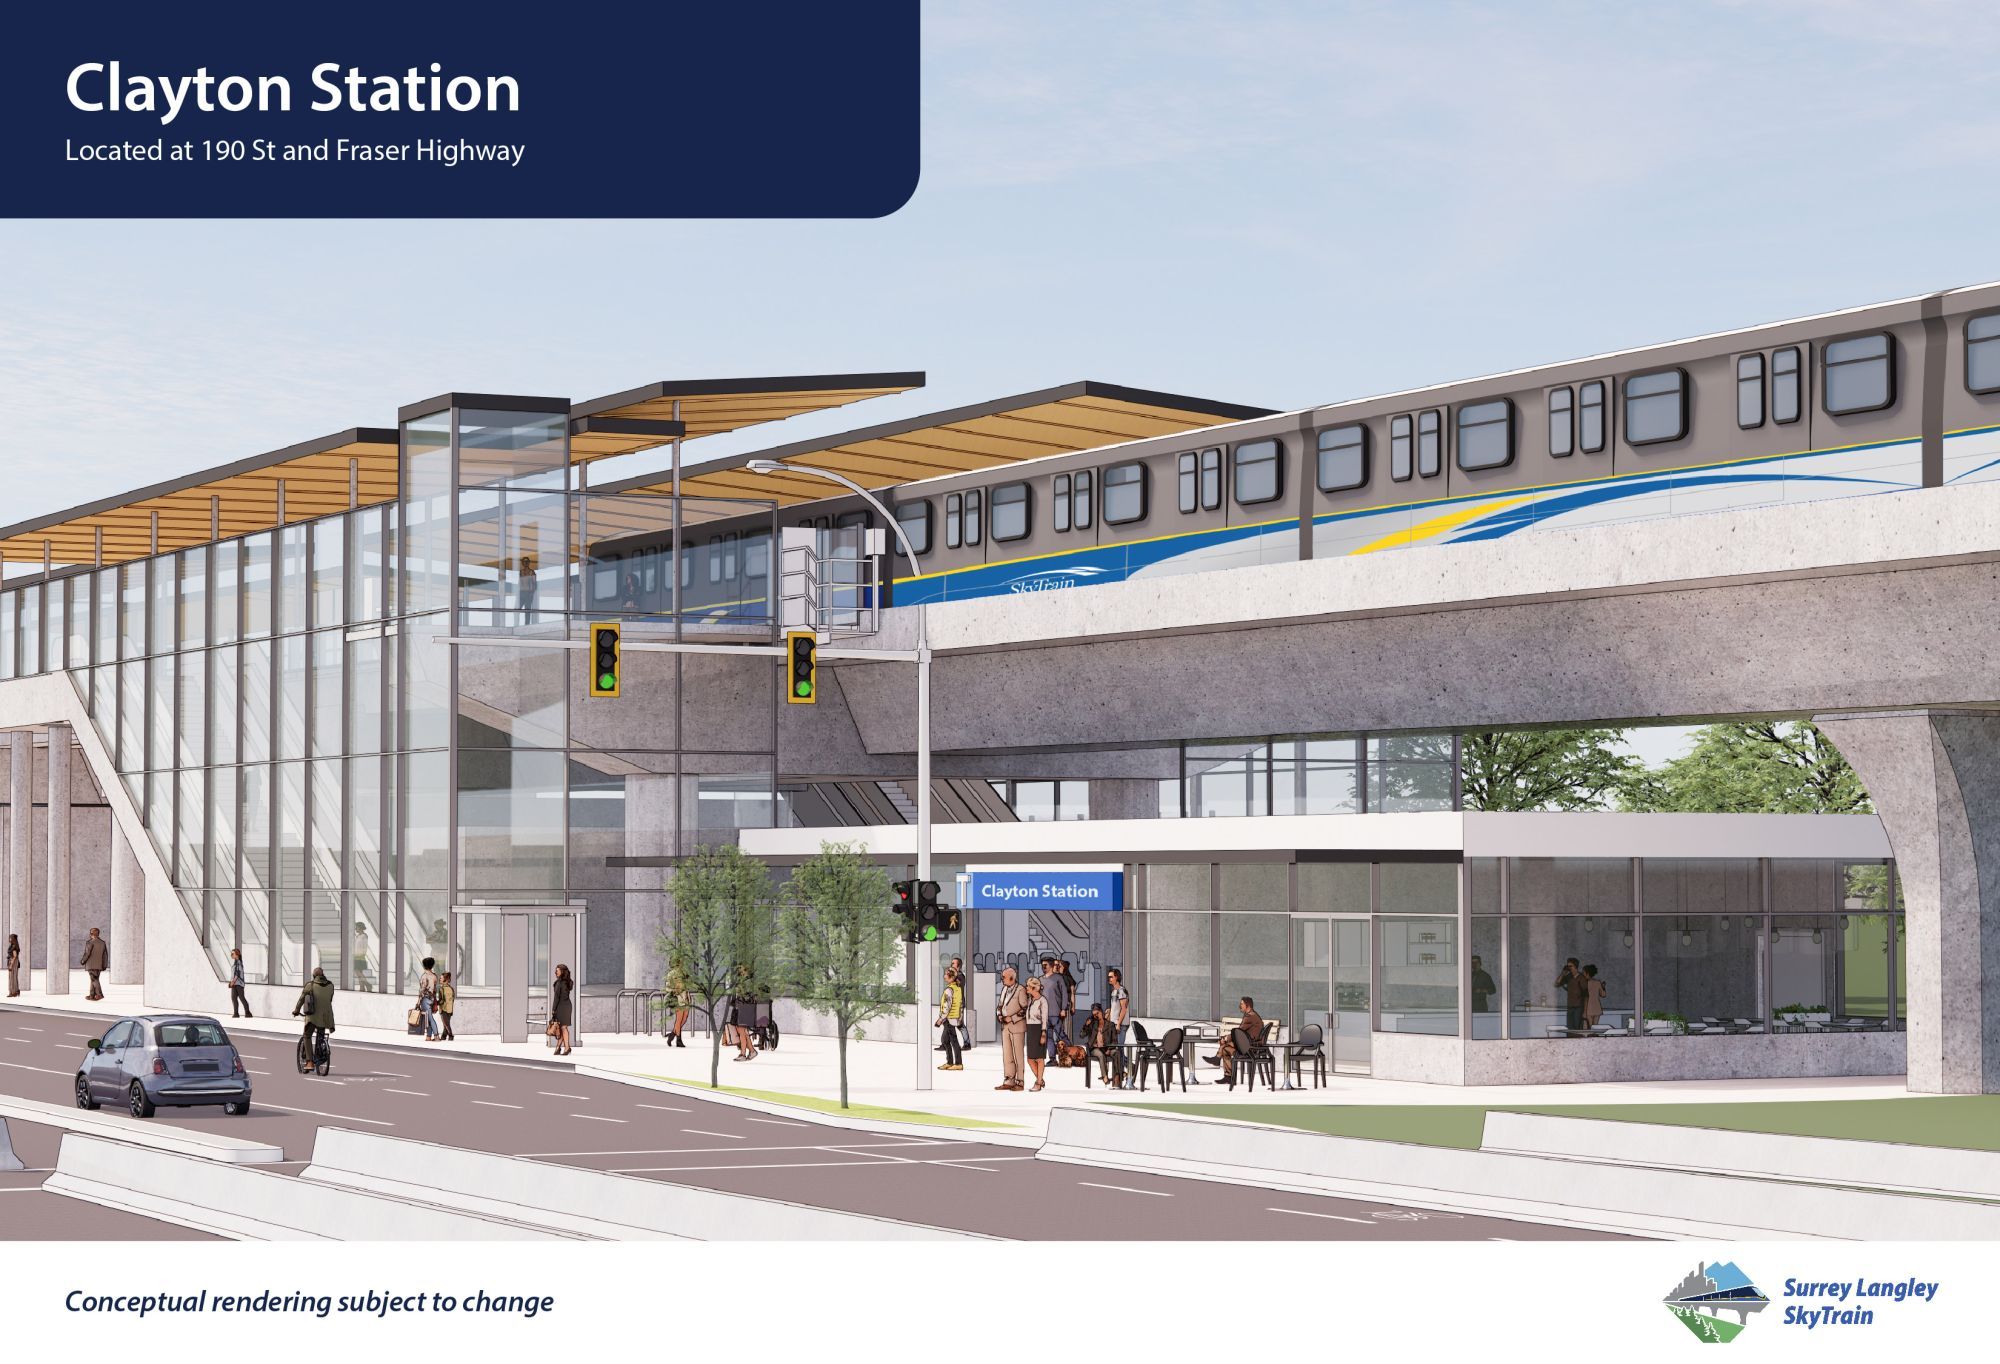 Preferred proponent selected for Surrey Langley SkyTrain systems, trackwork